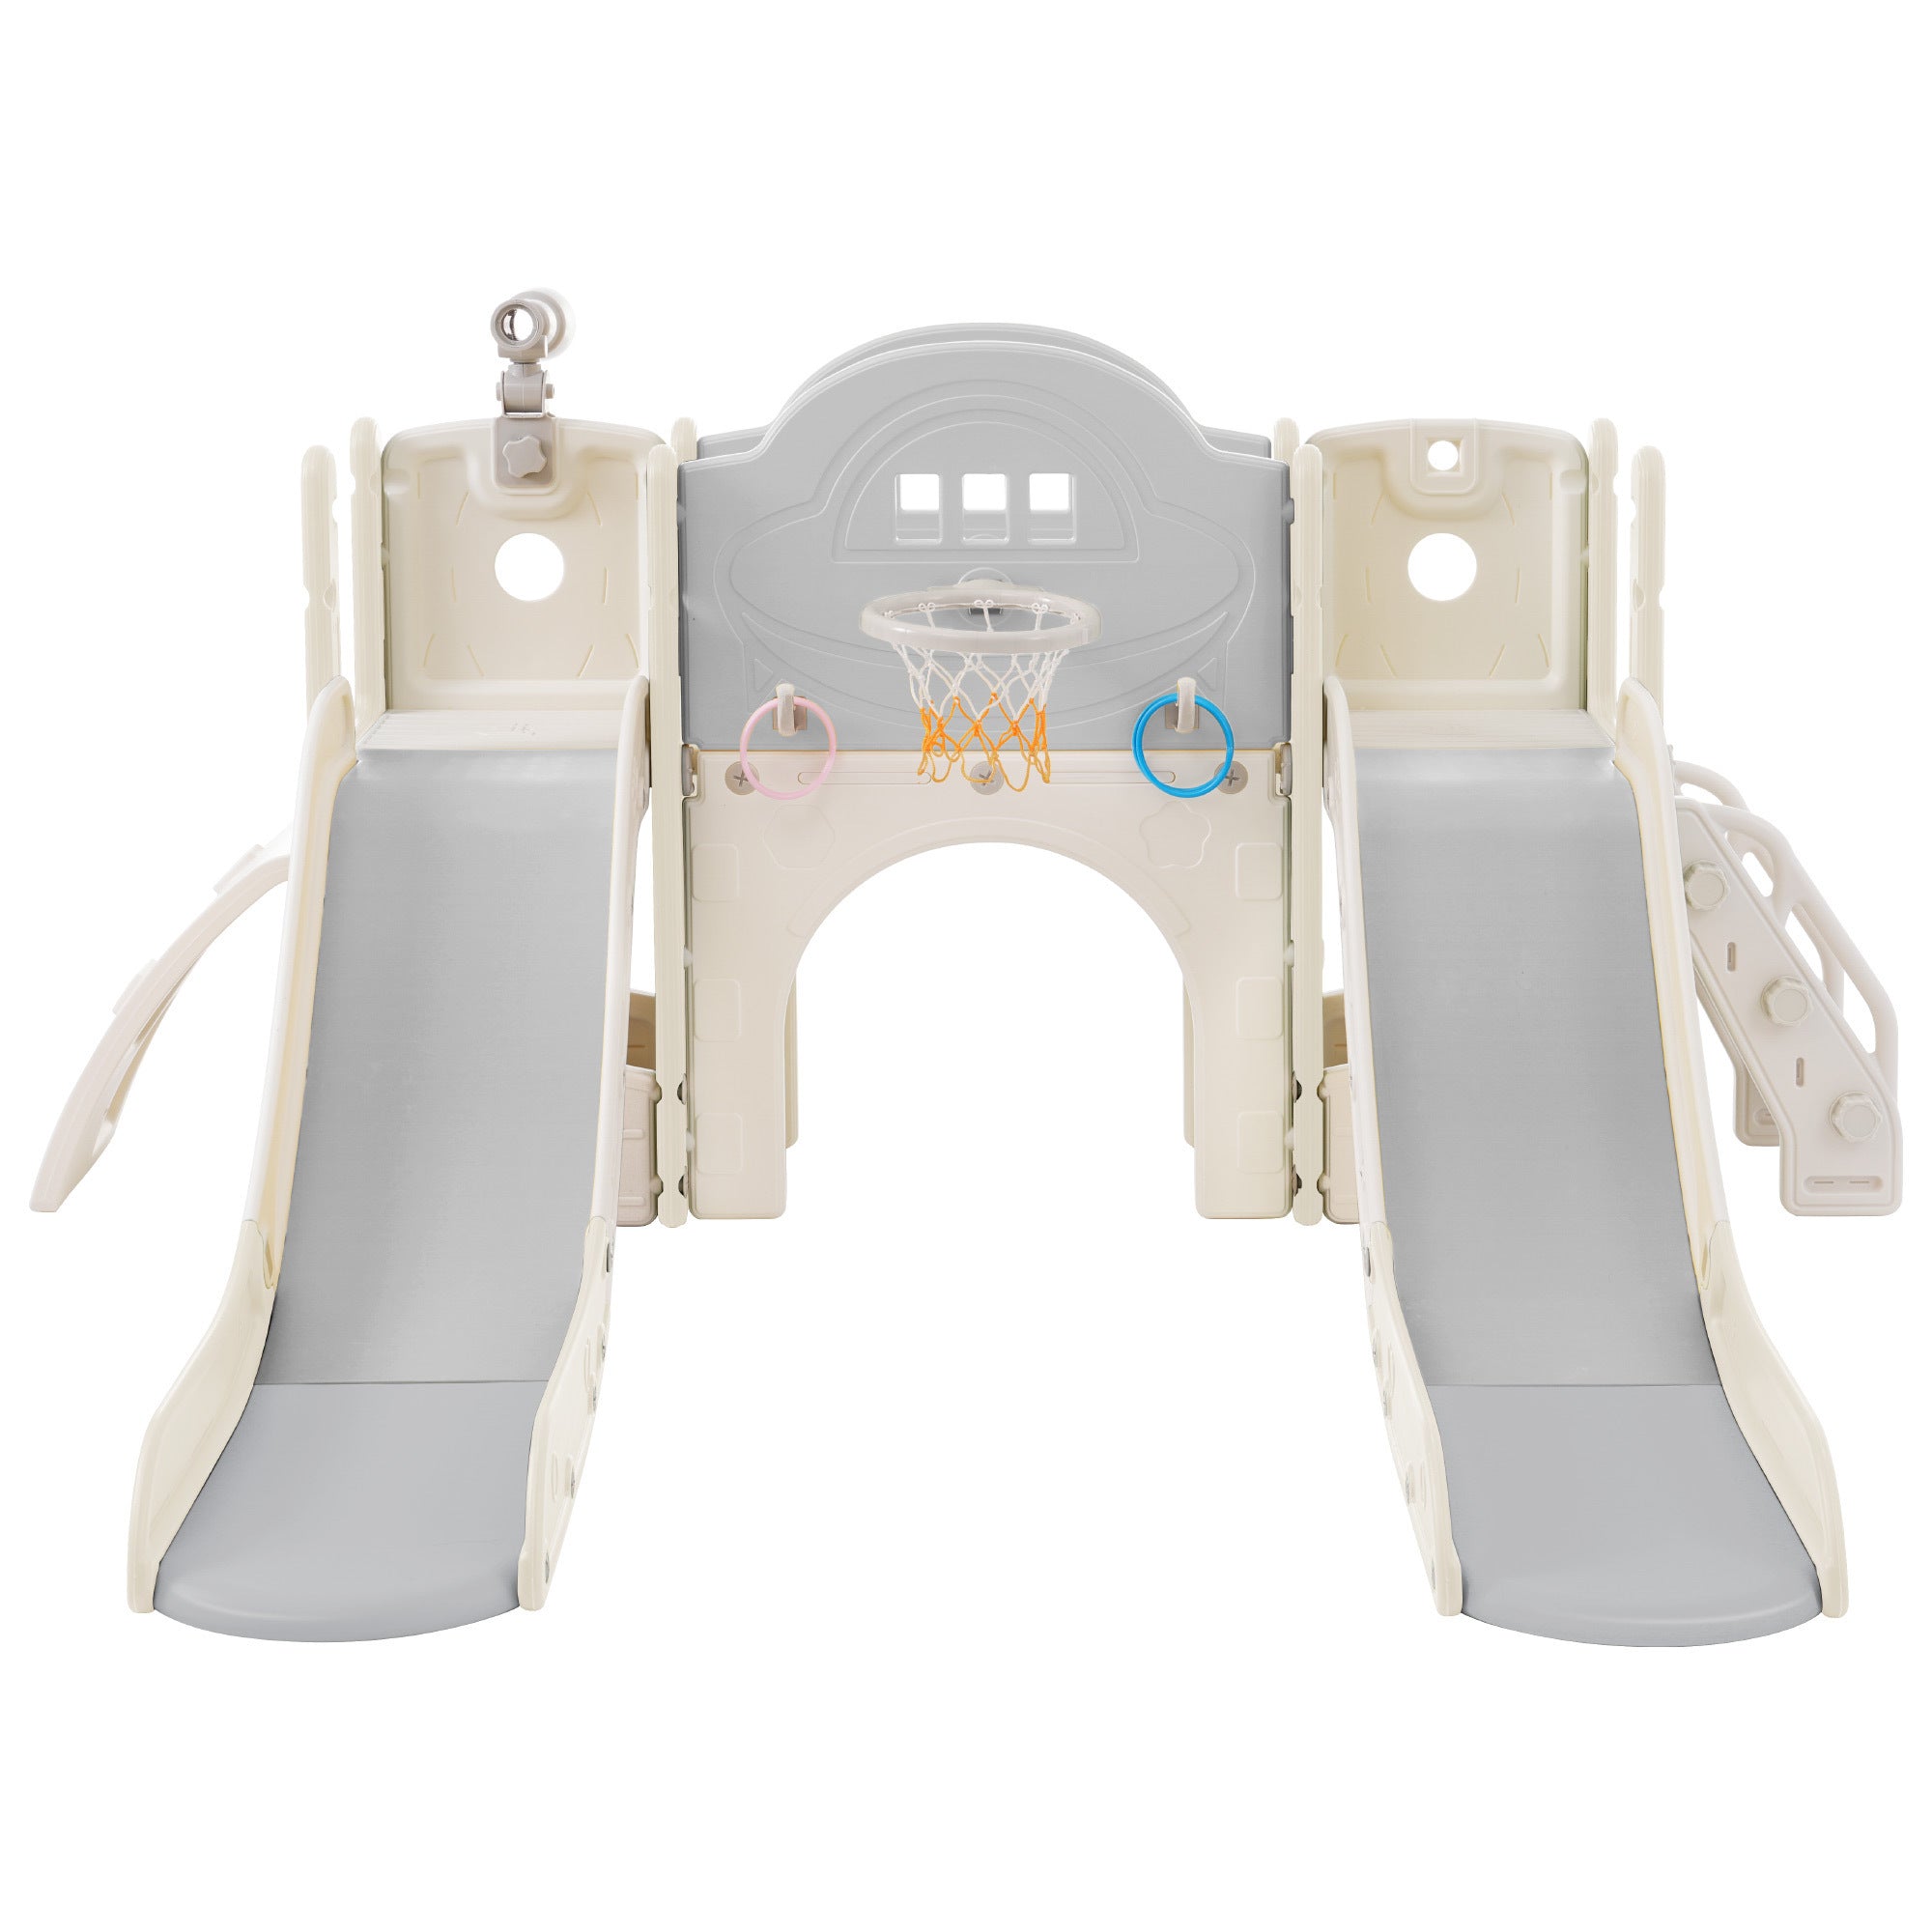 Kids Slide Playset Structure 7 in 1, Freestanding  Spaceship Set with Slide, Arch Tunnel, Ring Toss and Basketball Hoop,Double Slides for Toddlers, Kids Climbers Playground